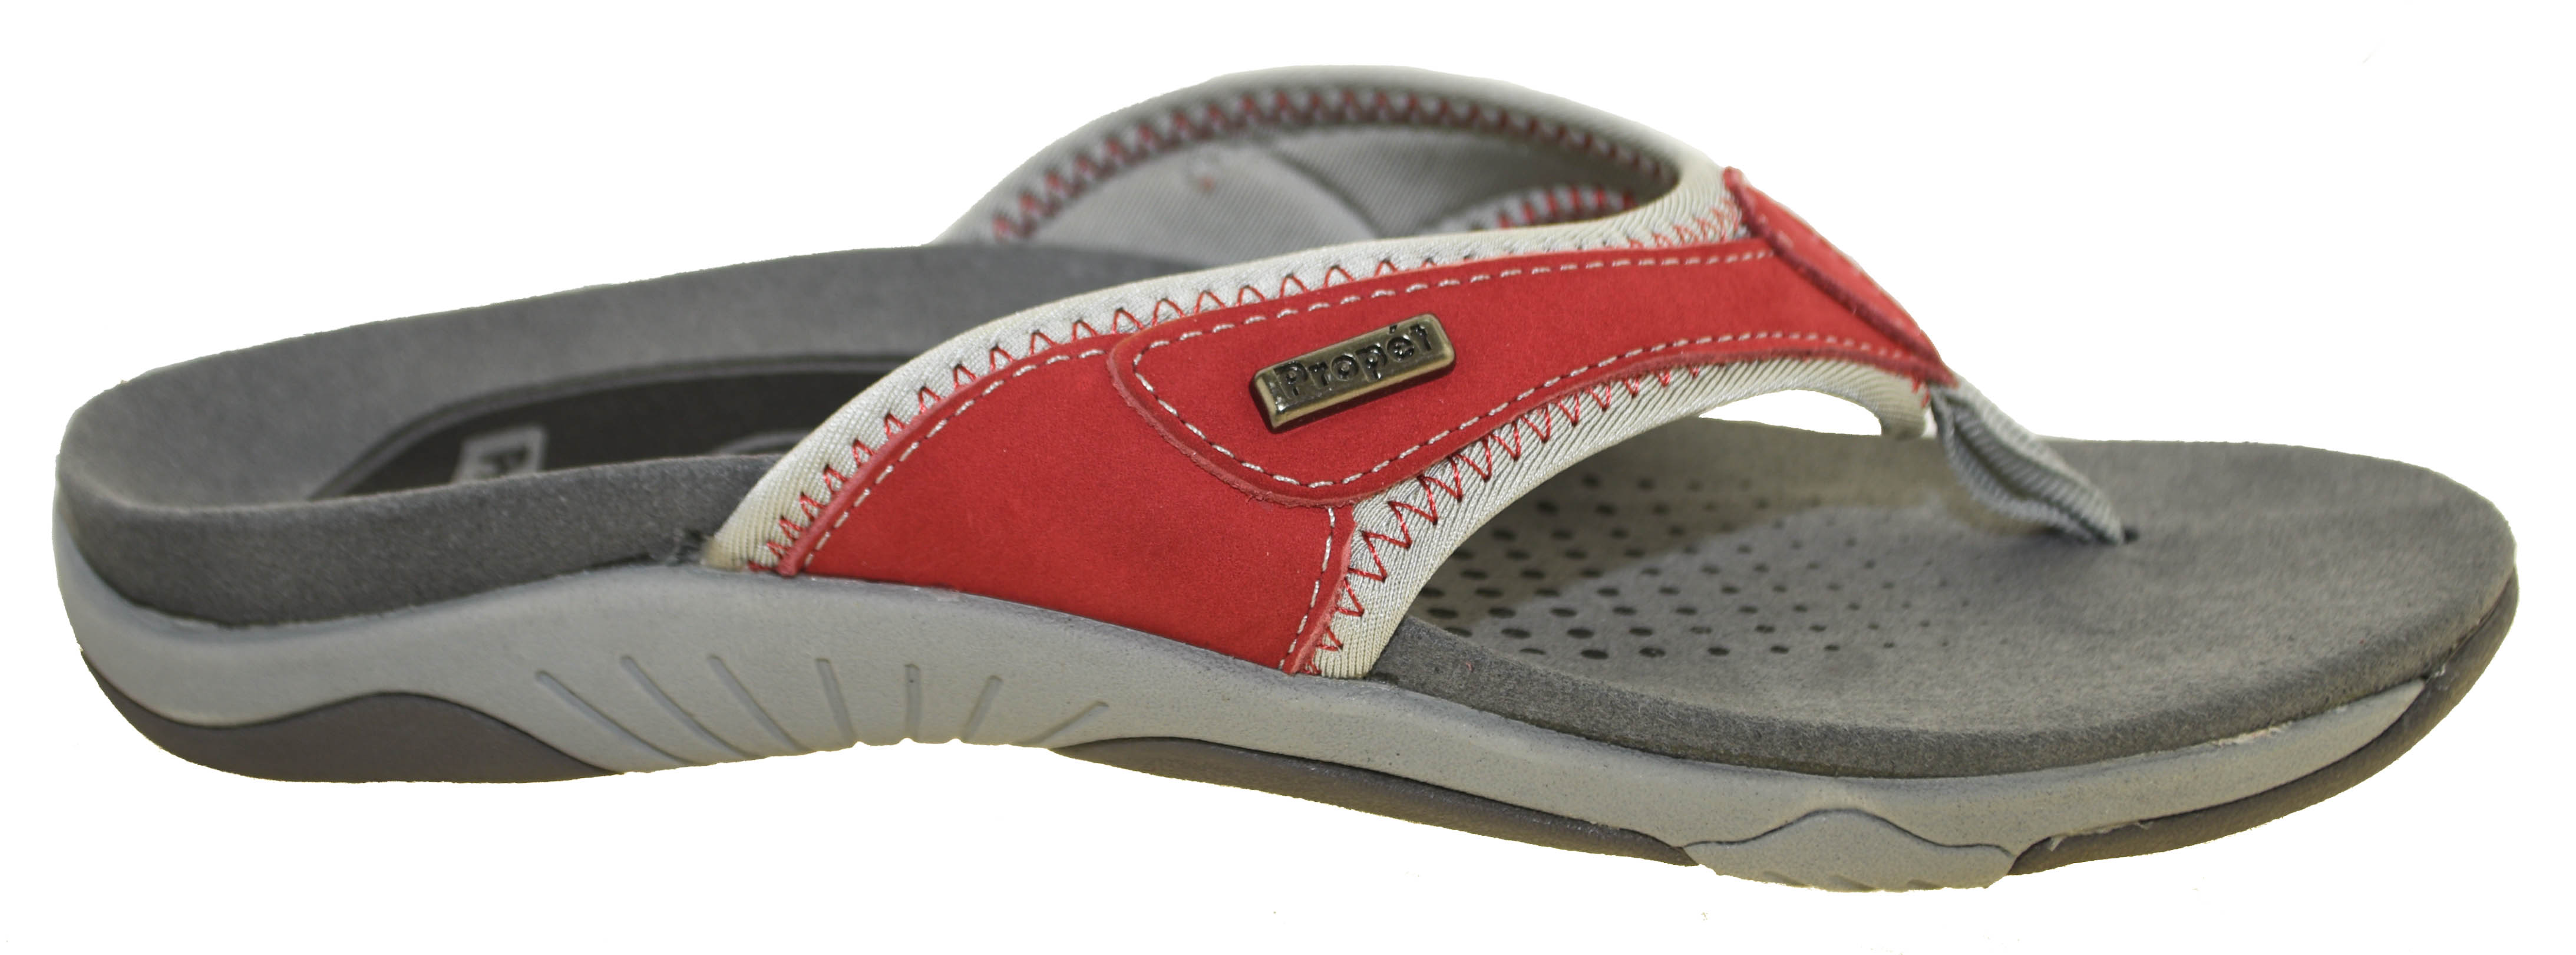 Hartley Sandal Red/Silver Style W0600 